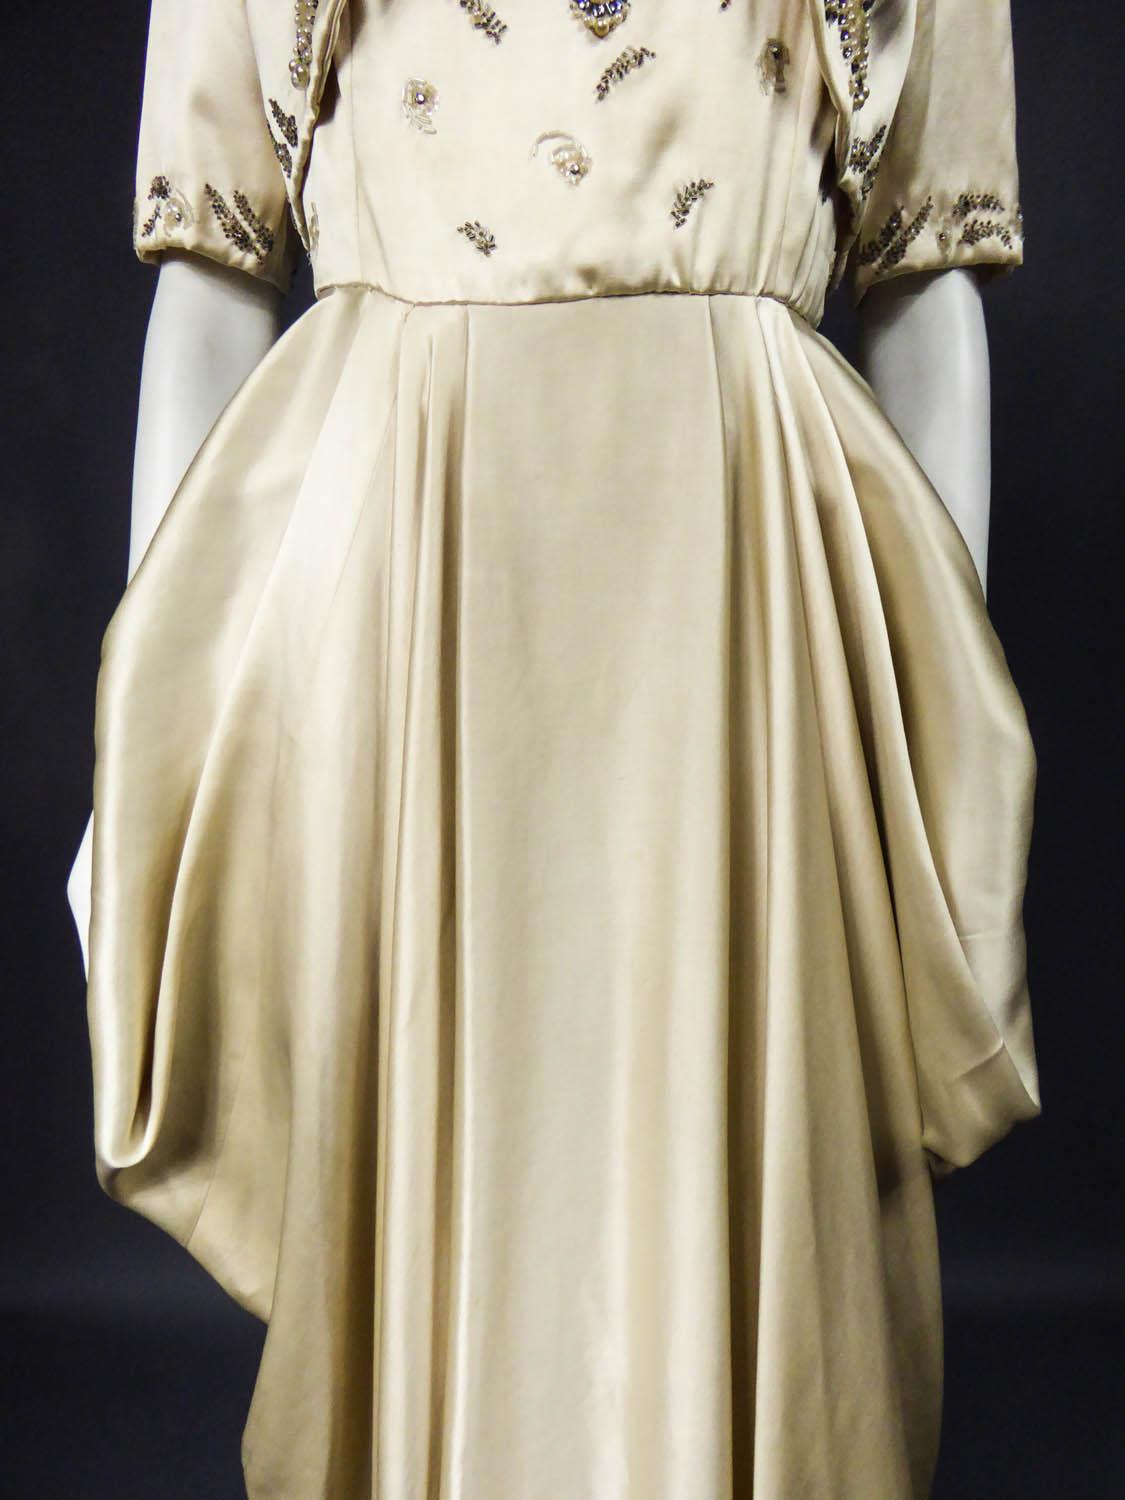 pierre balmain evening dress in pale pink satin and cream satin brocade with applied maple leaves